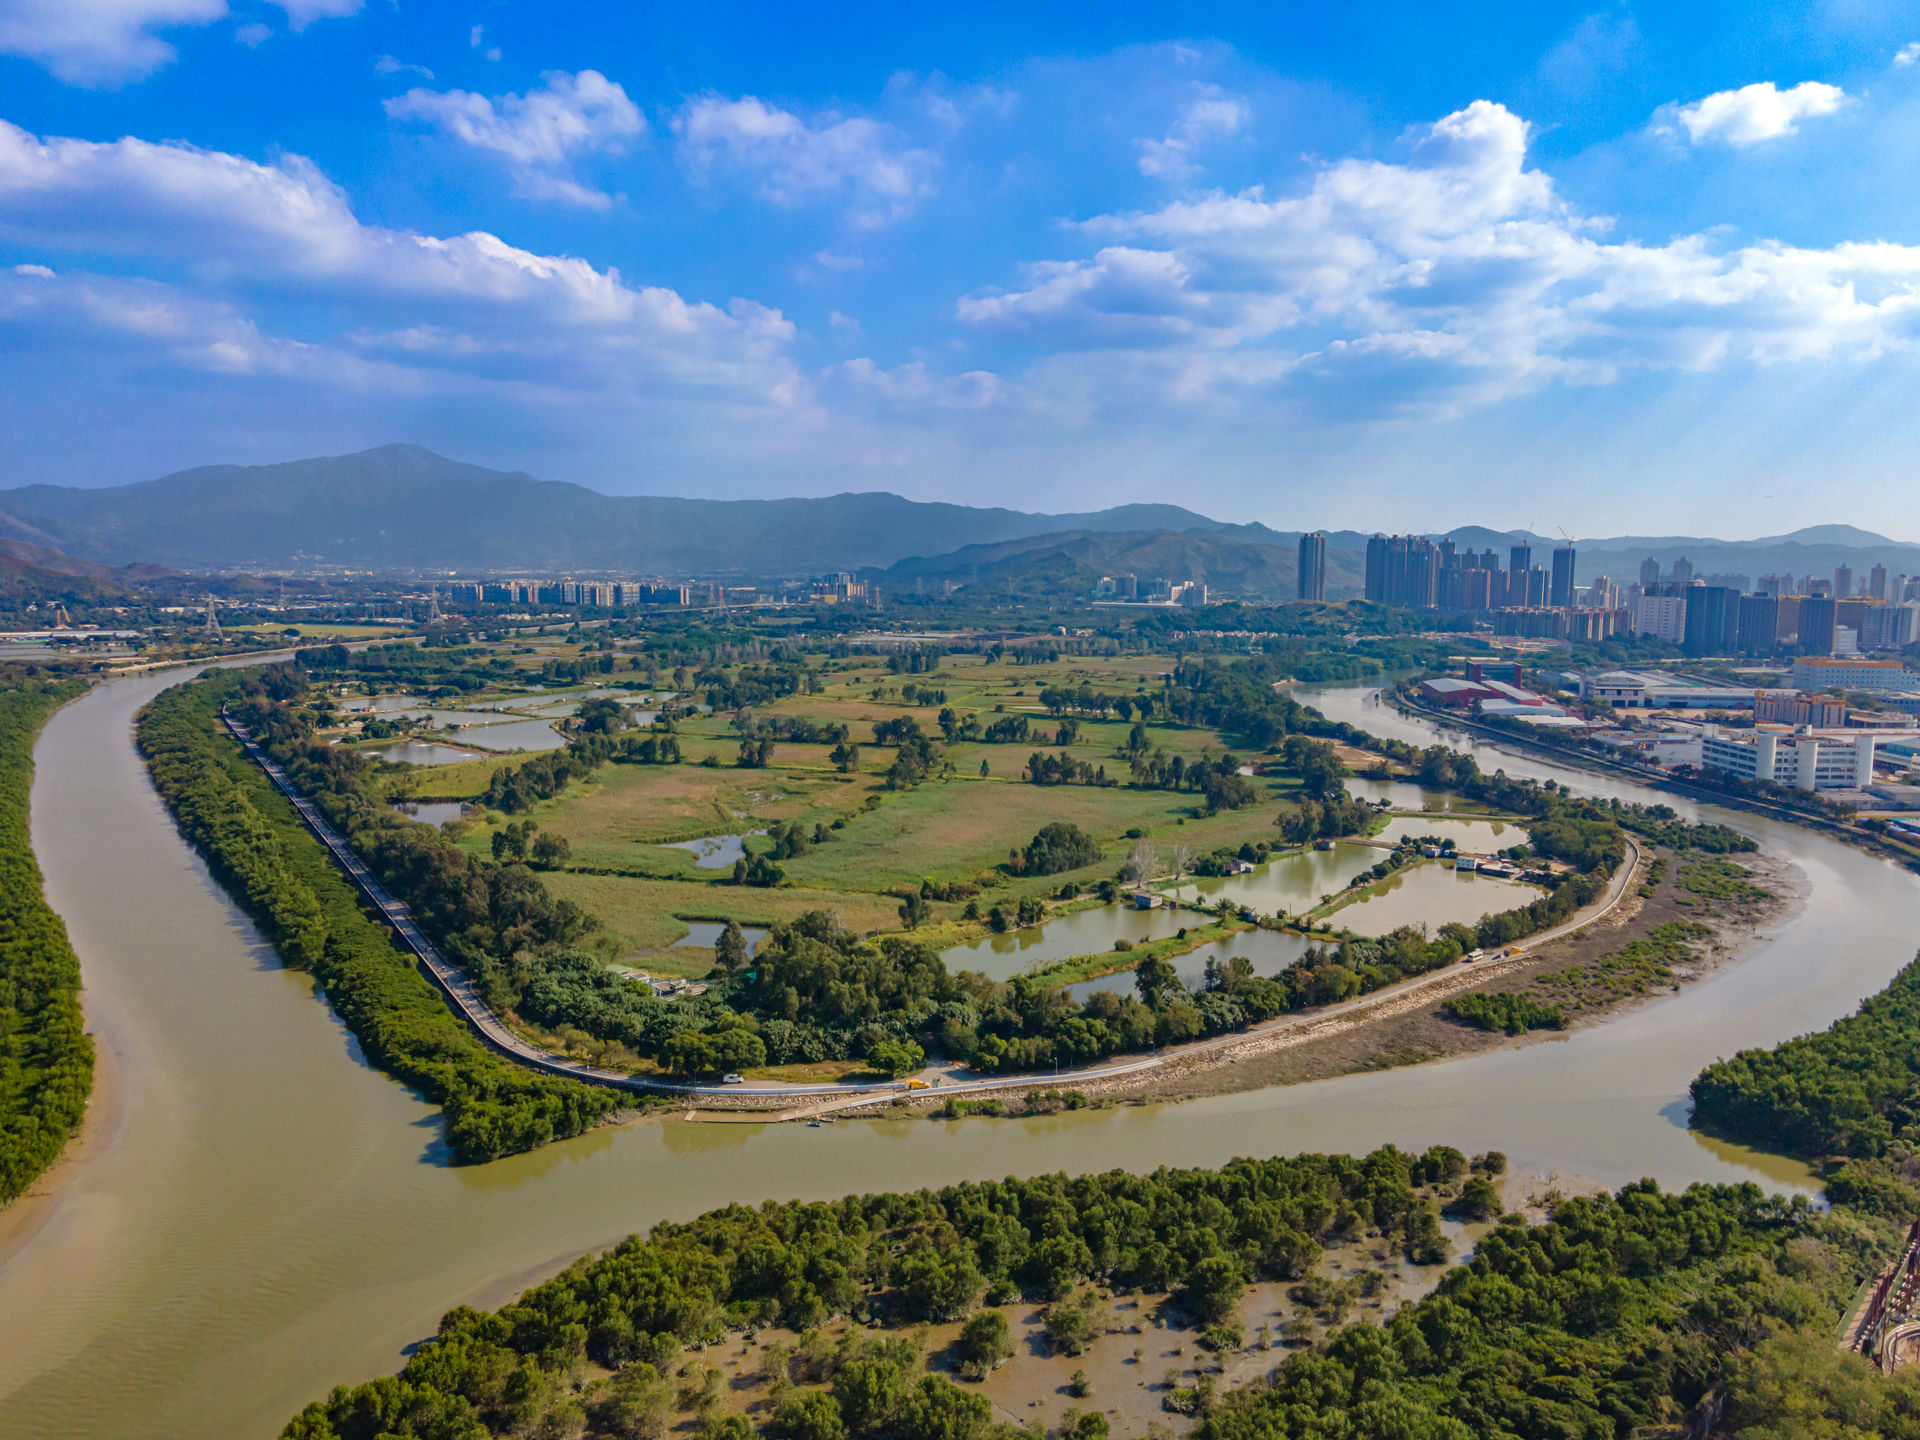 Confluence of Kam Tin River and Shan Pui River